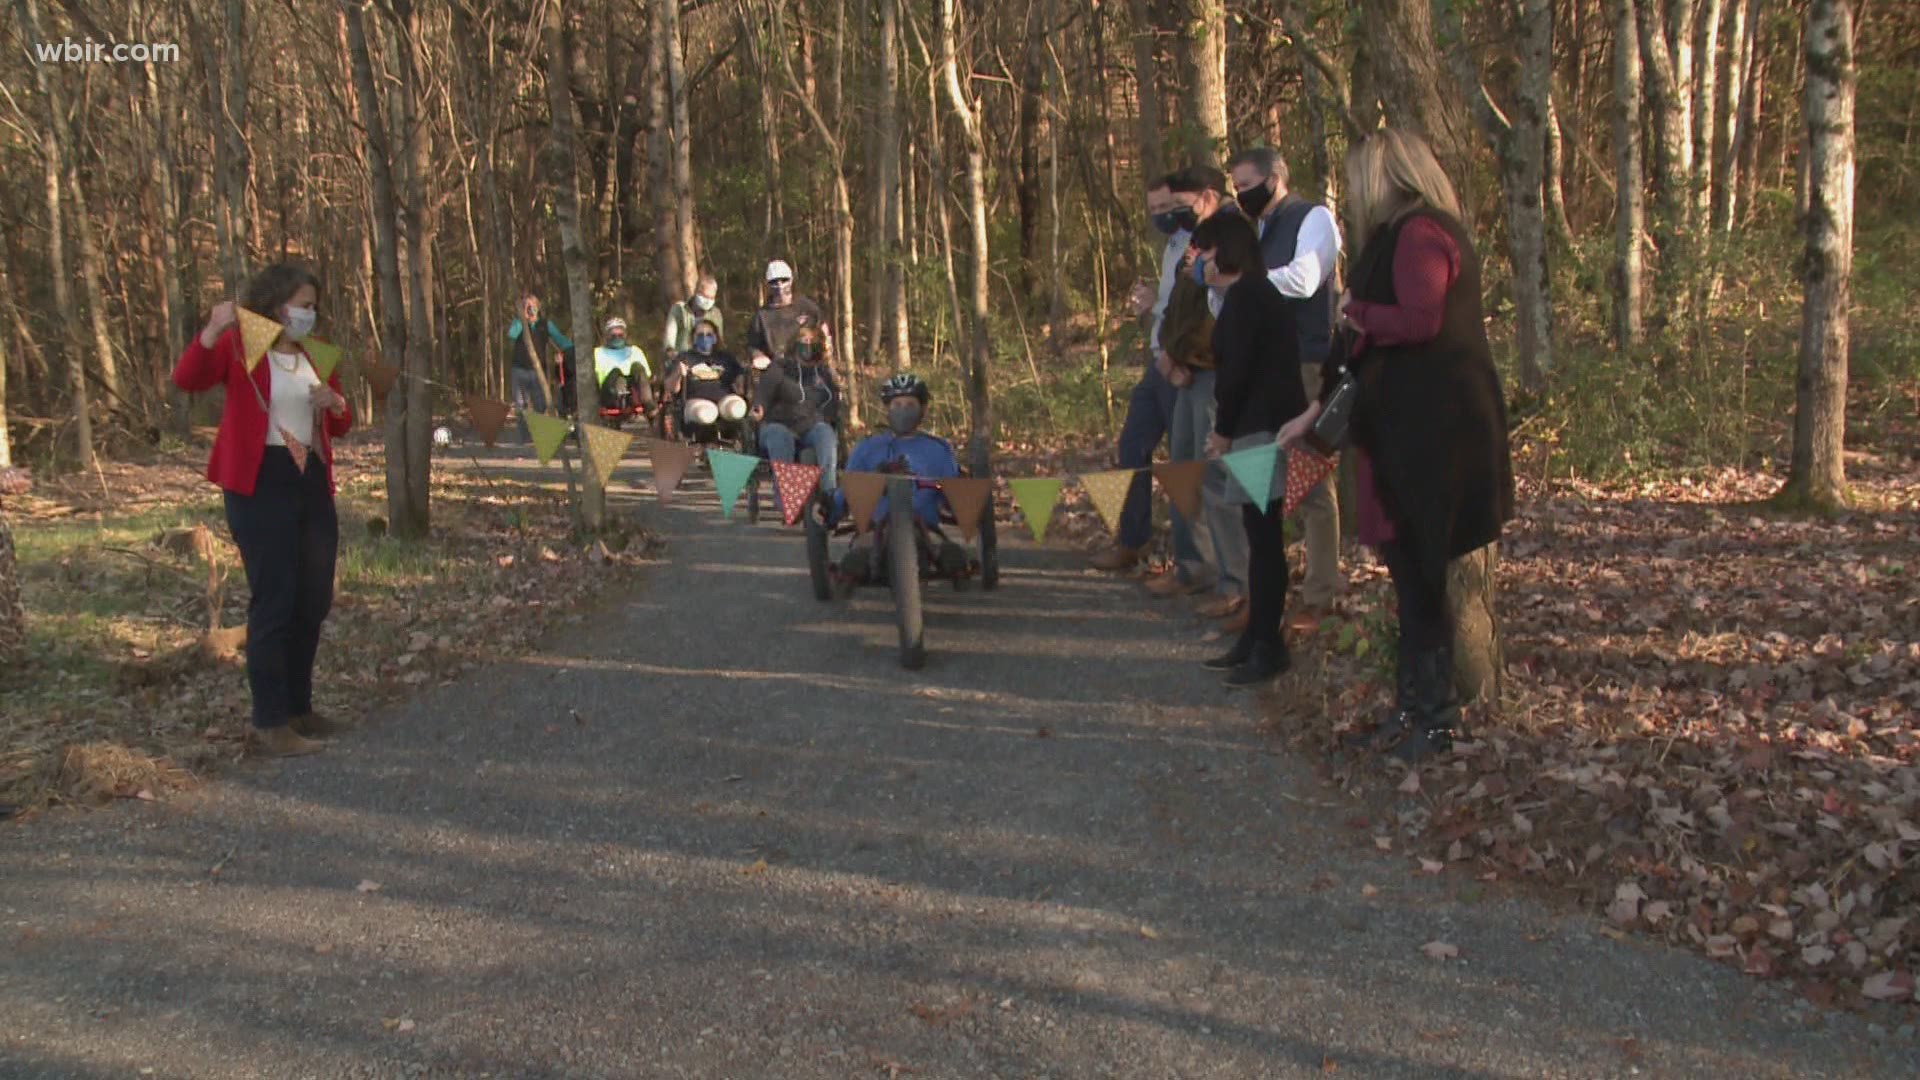 The Legacy Parks Foundation cut the ribbon on the Sharps' Ridge Playspace and Adaptive Trails.